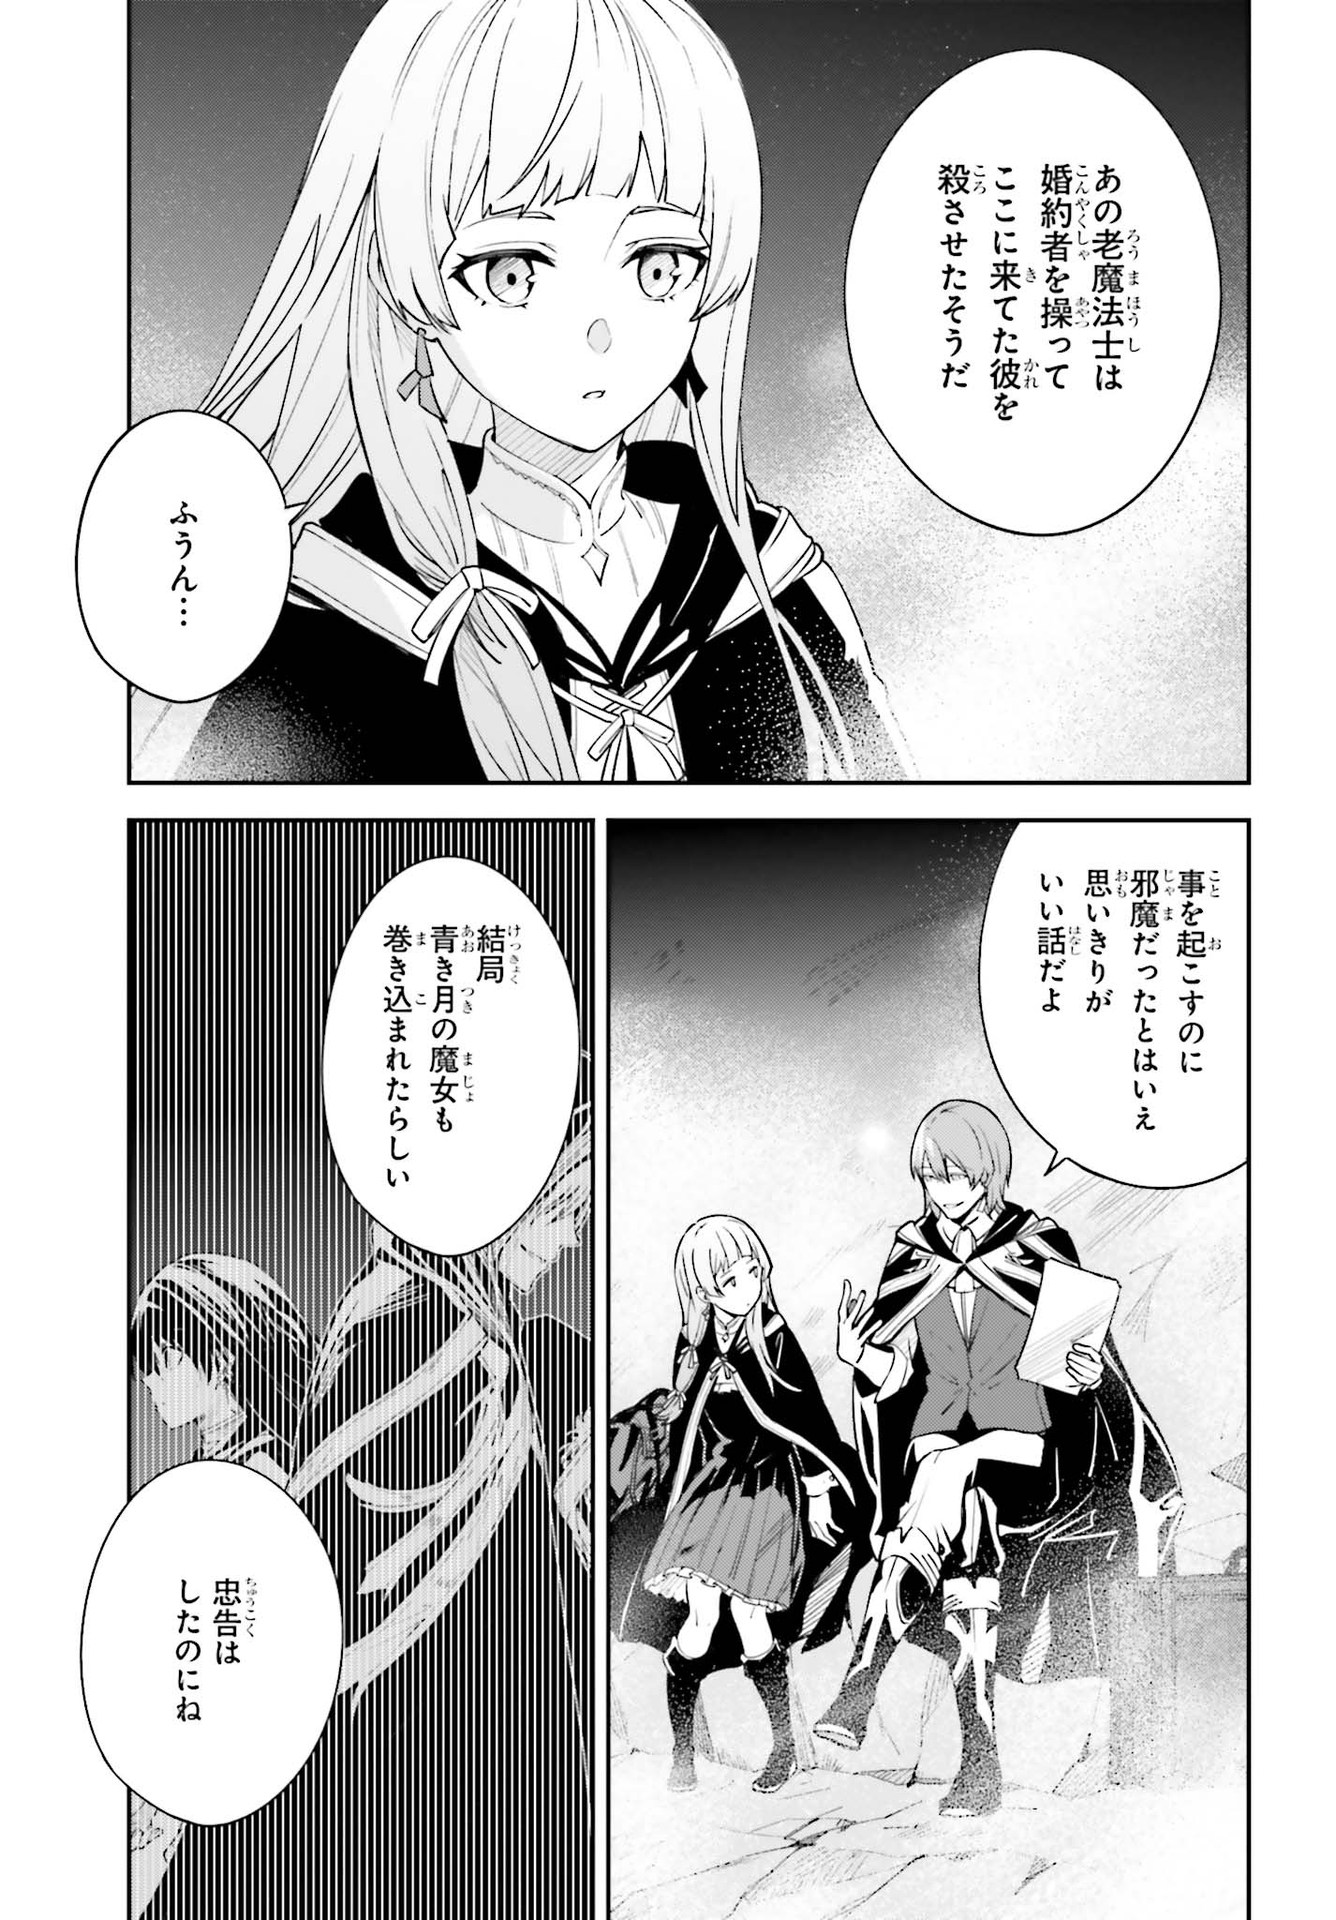 Unnamed Memory 第5.5話 - Page 3